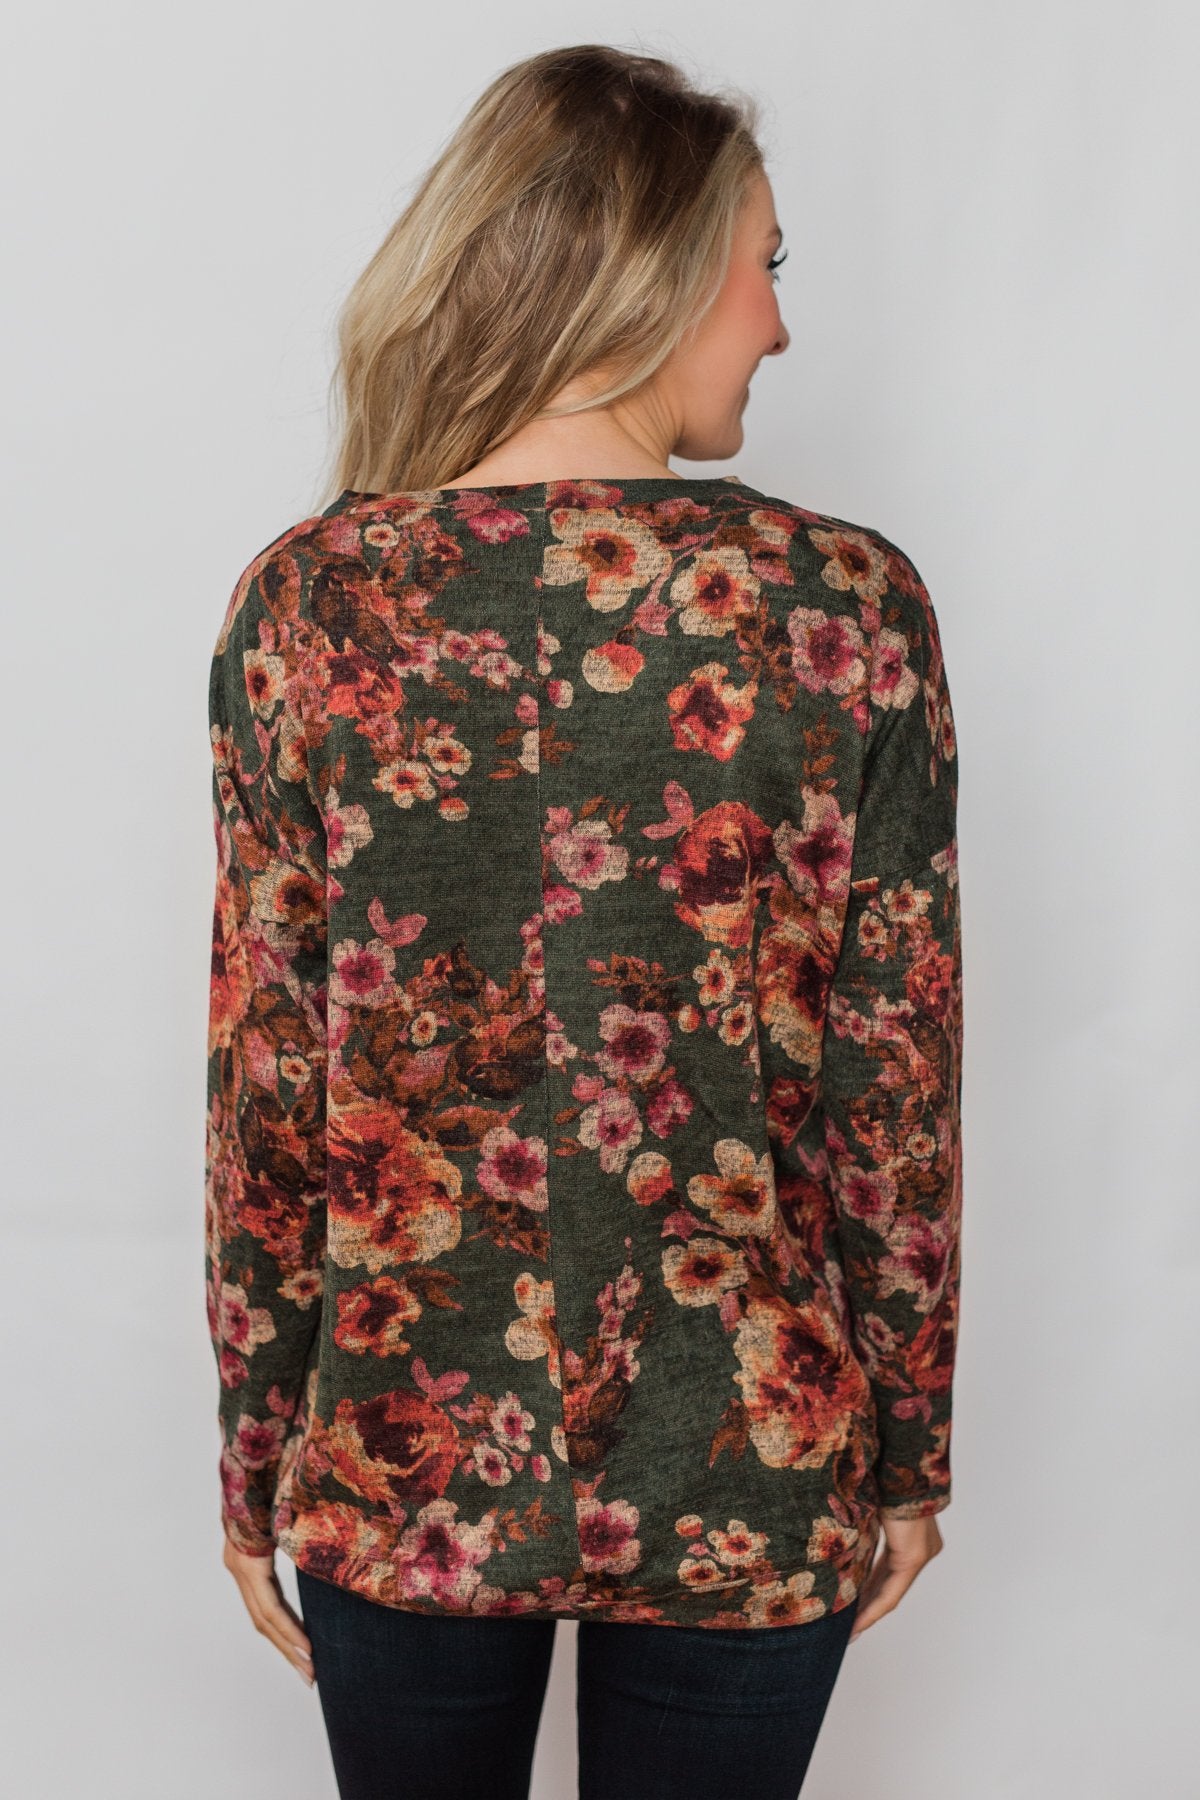 Just For You Floral Pullover Top- Olive